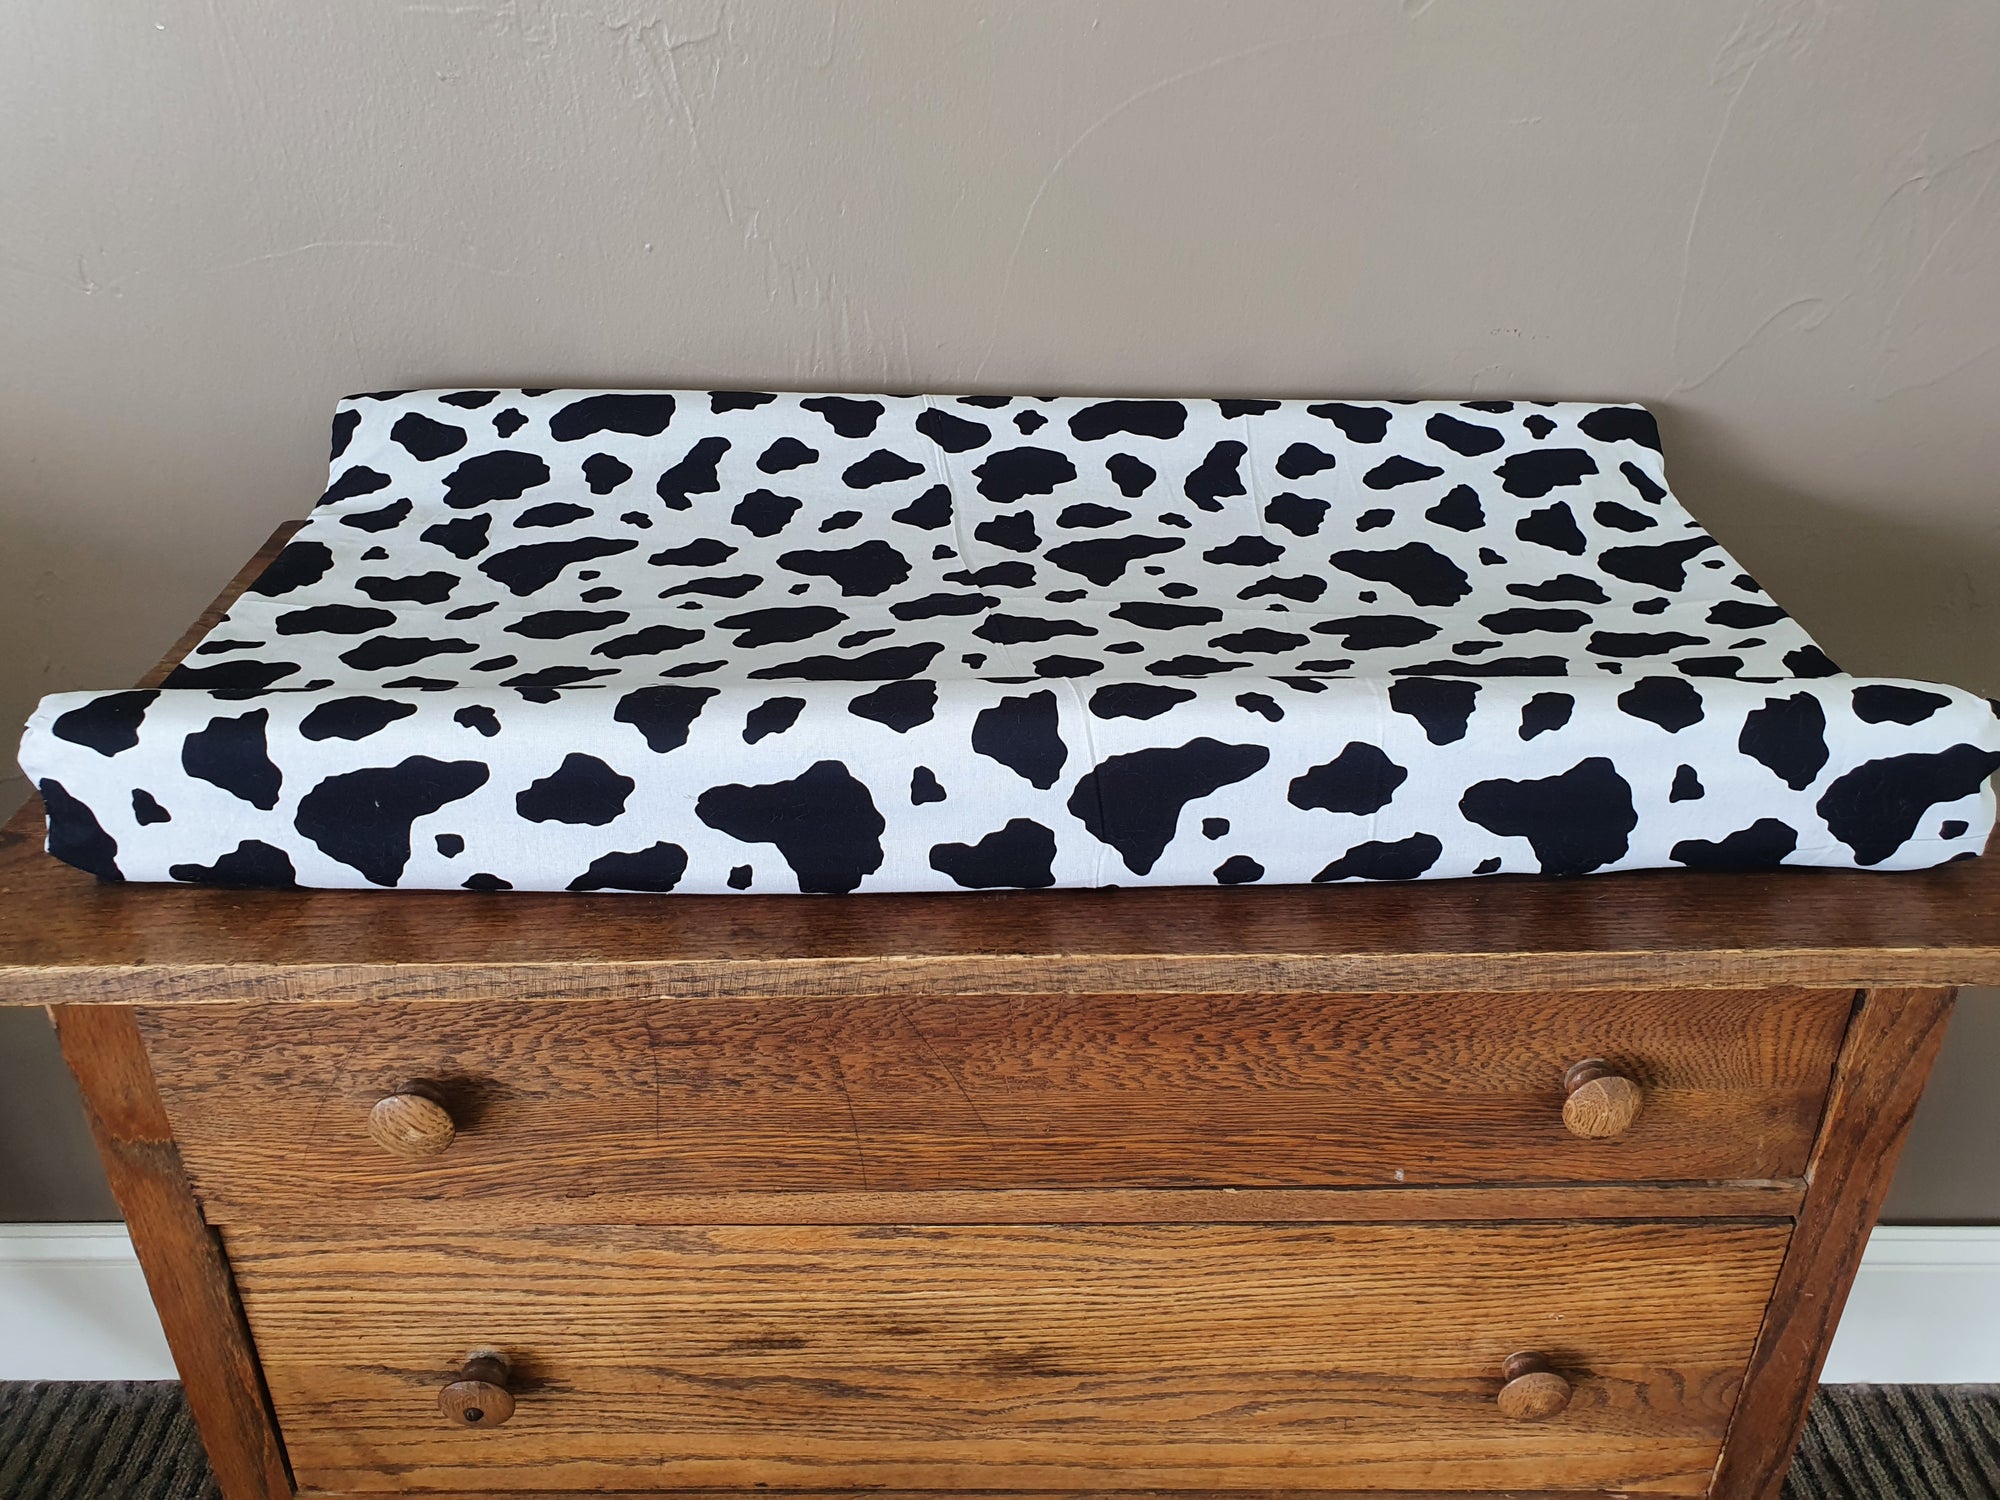 Changing Pad Cover - Cow Print Cotton in Black White - DBC Baby Bedding Co 